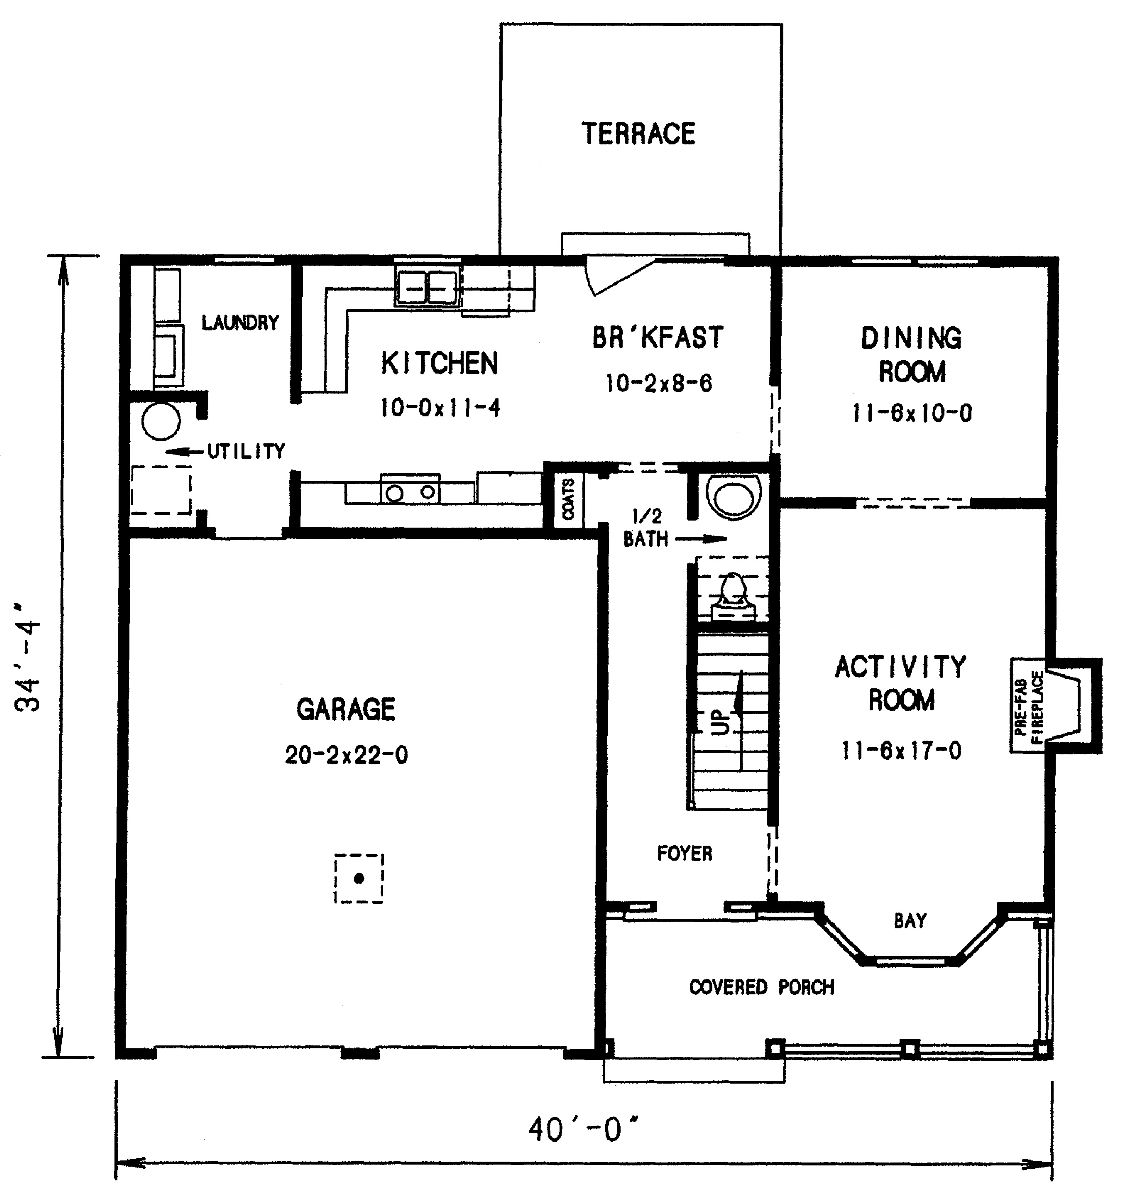 Cottage House Plan with 3 Bedrooms and 2.5 Baths Plan 3684